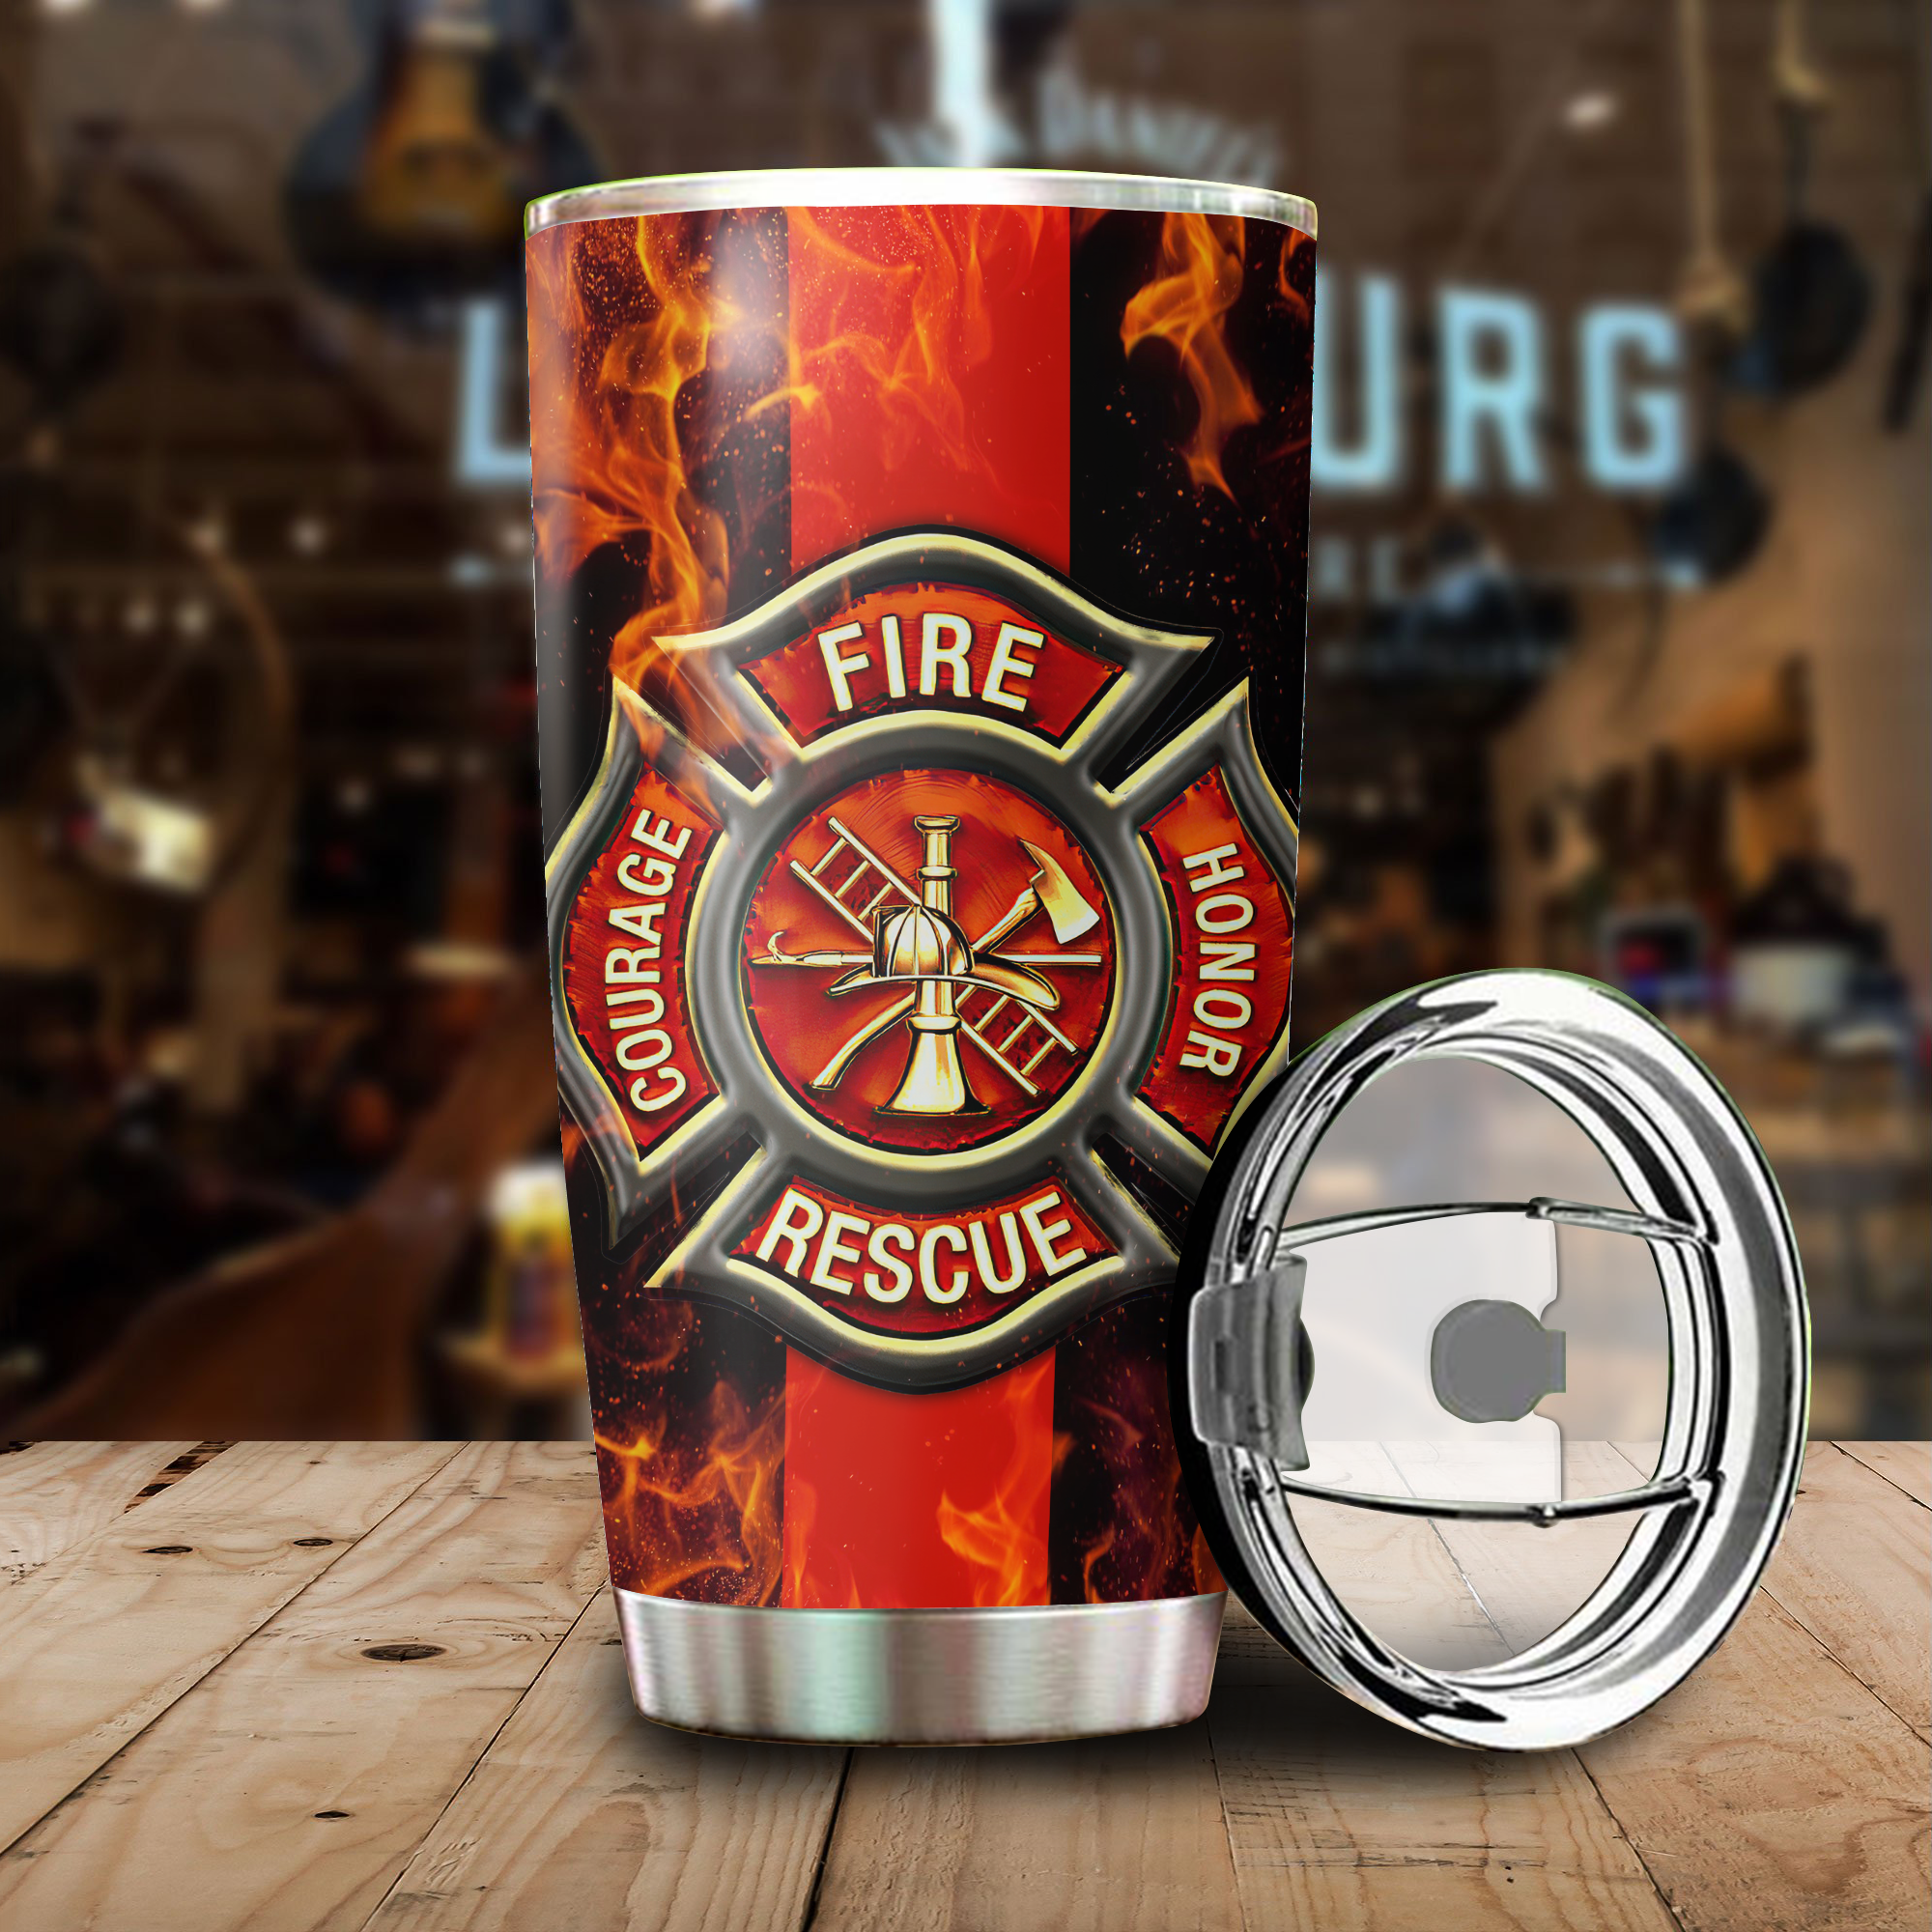 Firefighter Tumbler Knows More Than She Says Special Gift For Wife Mom Friend Girl Friend